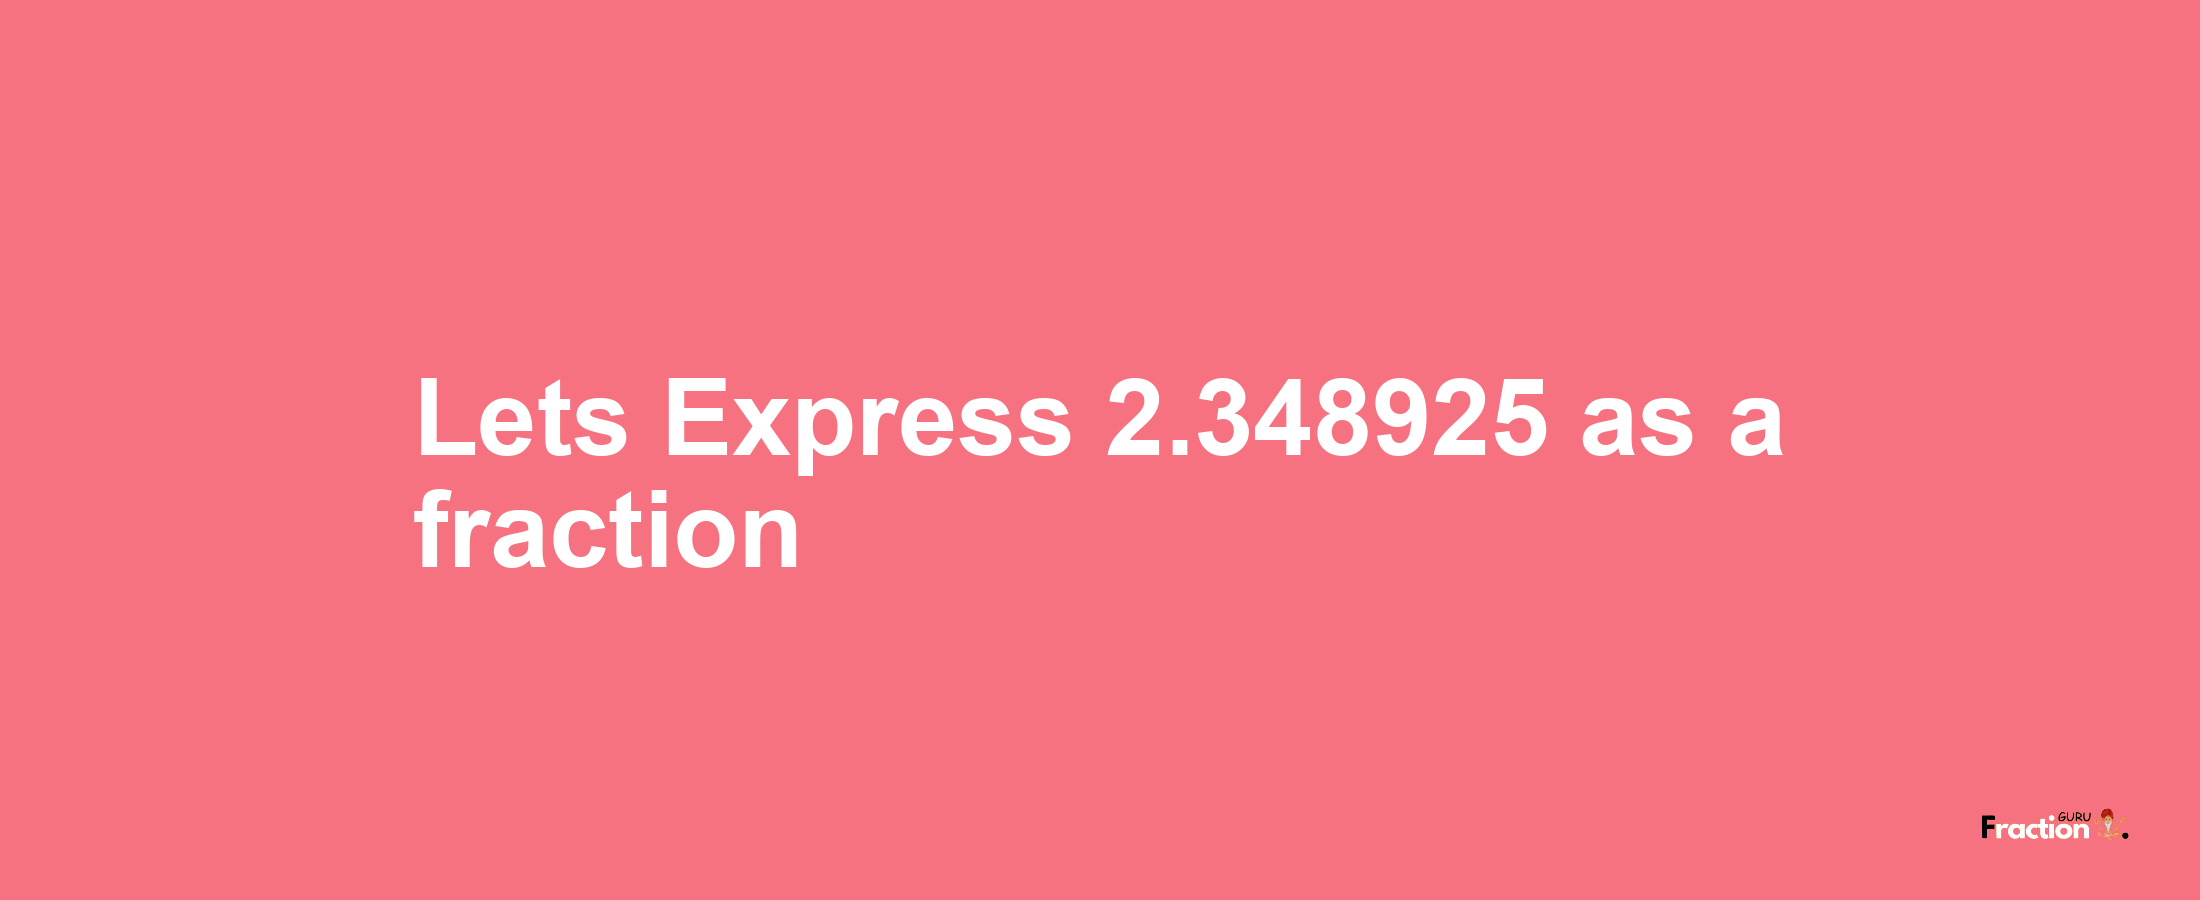 Lets Express 2.348925 as afraction